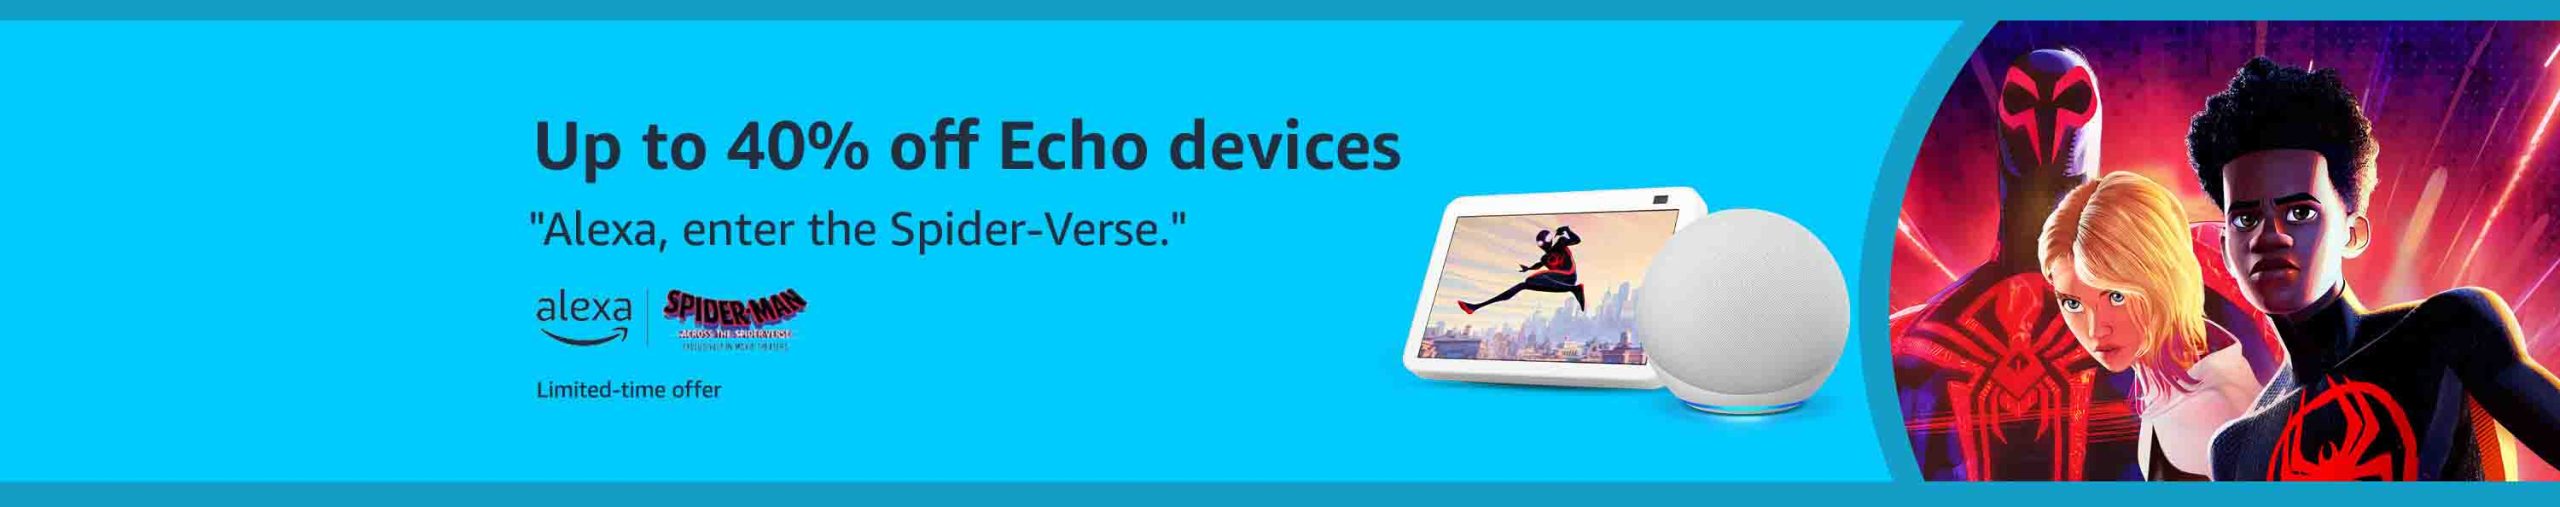 Promos on Echo devices